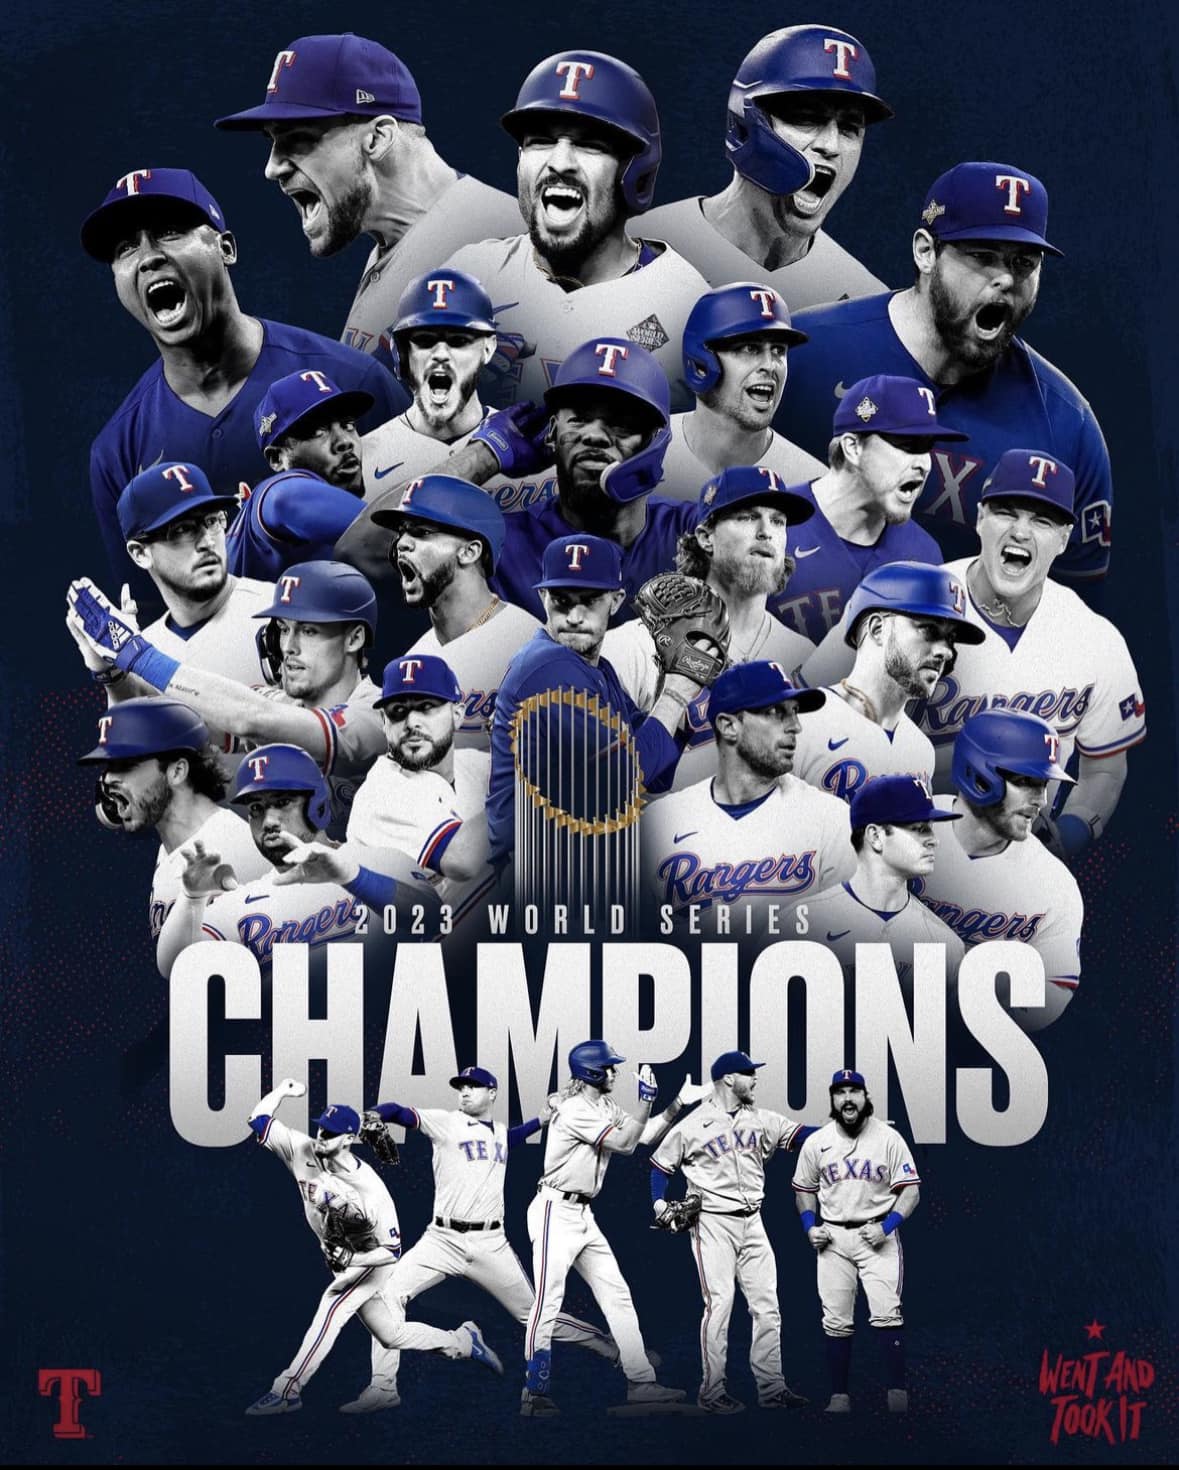 The Texas Rangers are your 2023 World Series CHAMPIONS!